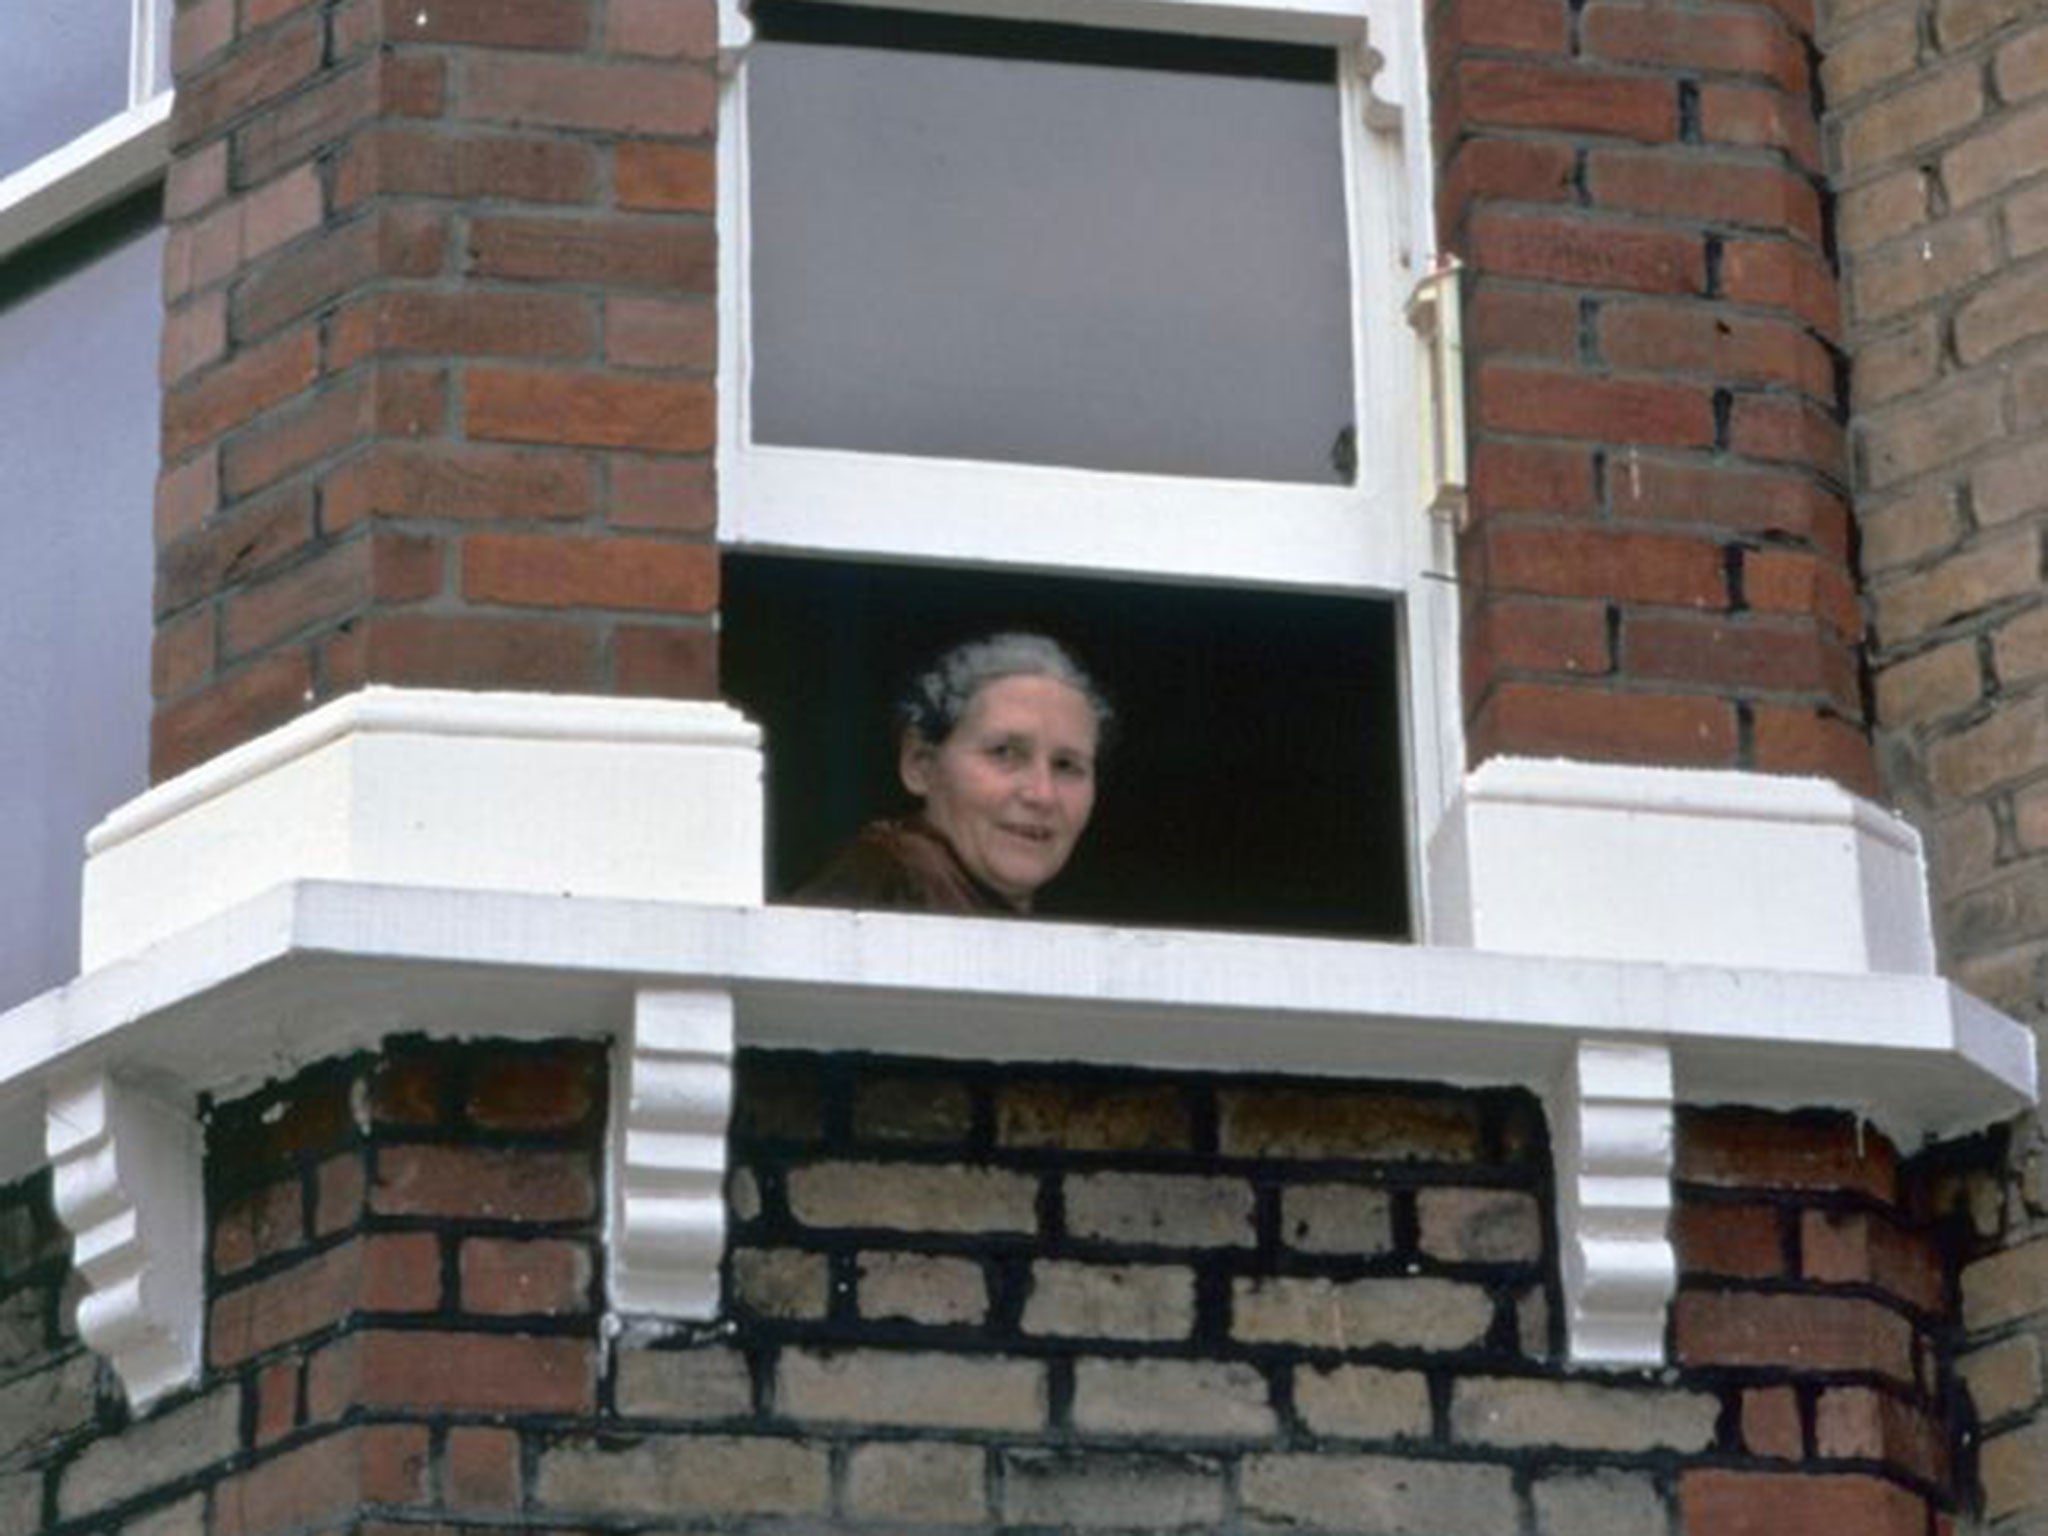 Doris Lessing looking out the window of her London flat (AFP)